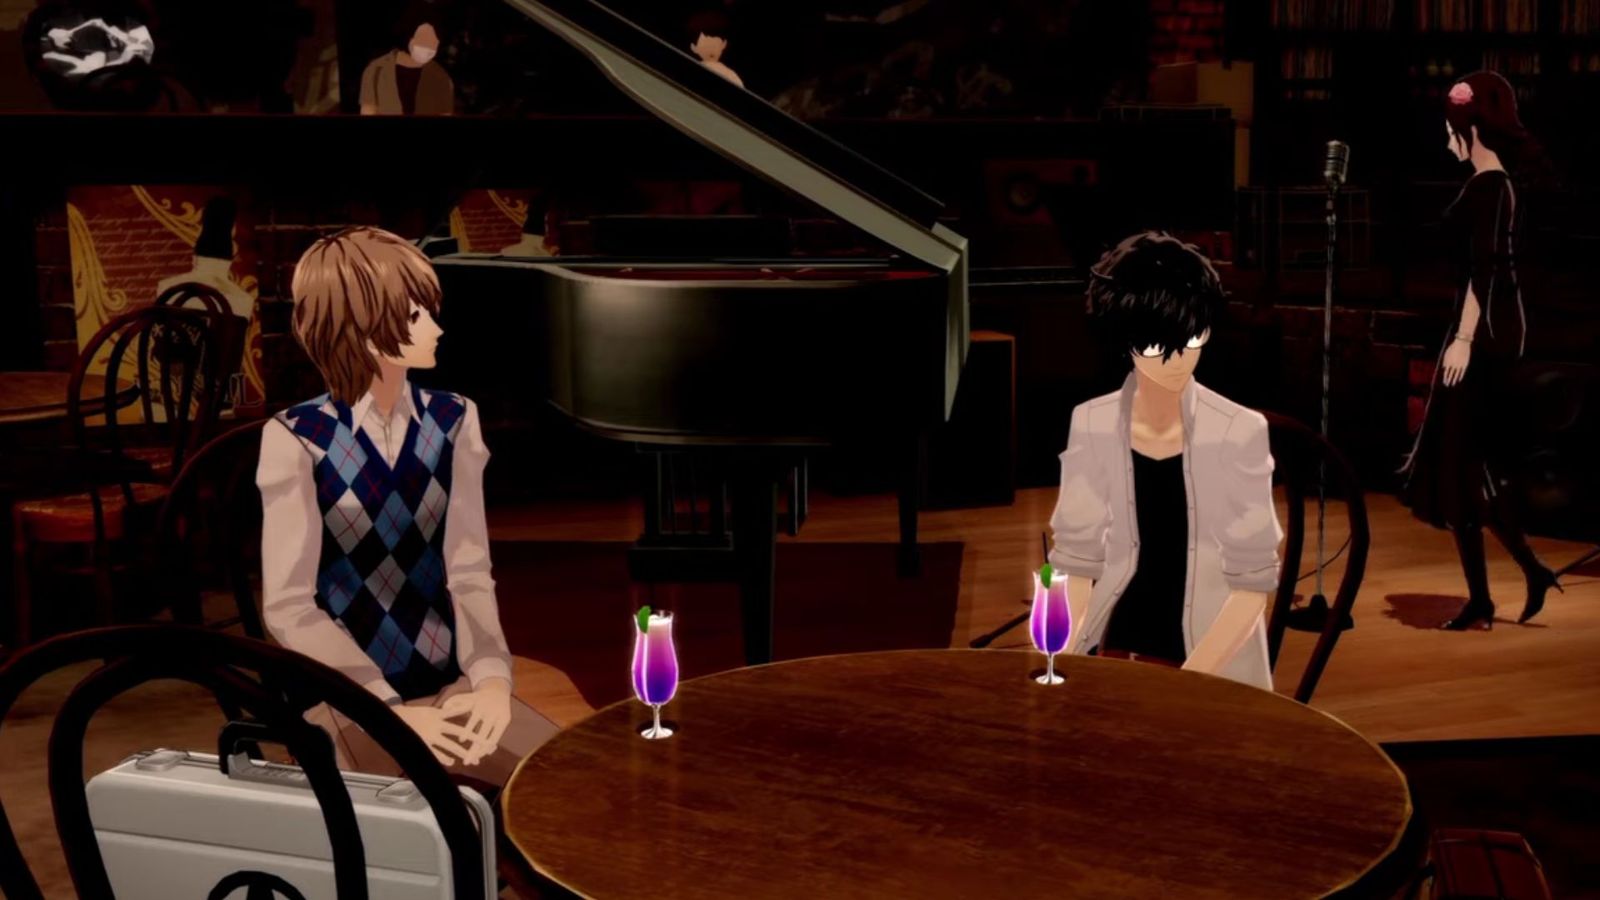 Akechi and Joker sitting in the Jazz Club in Persona 5 Royal